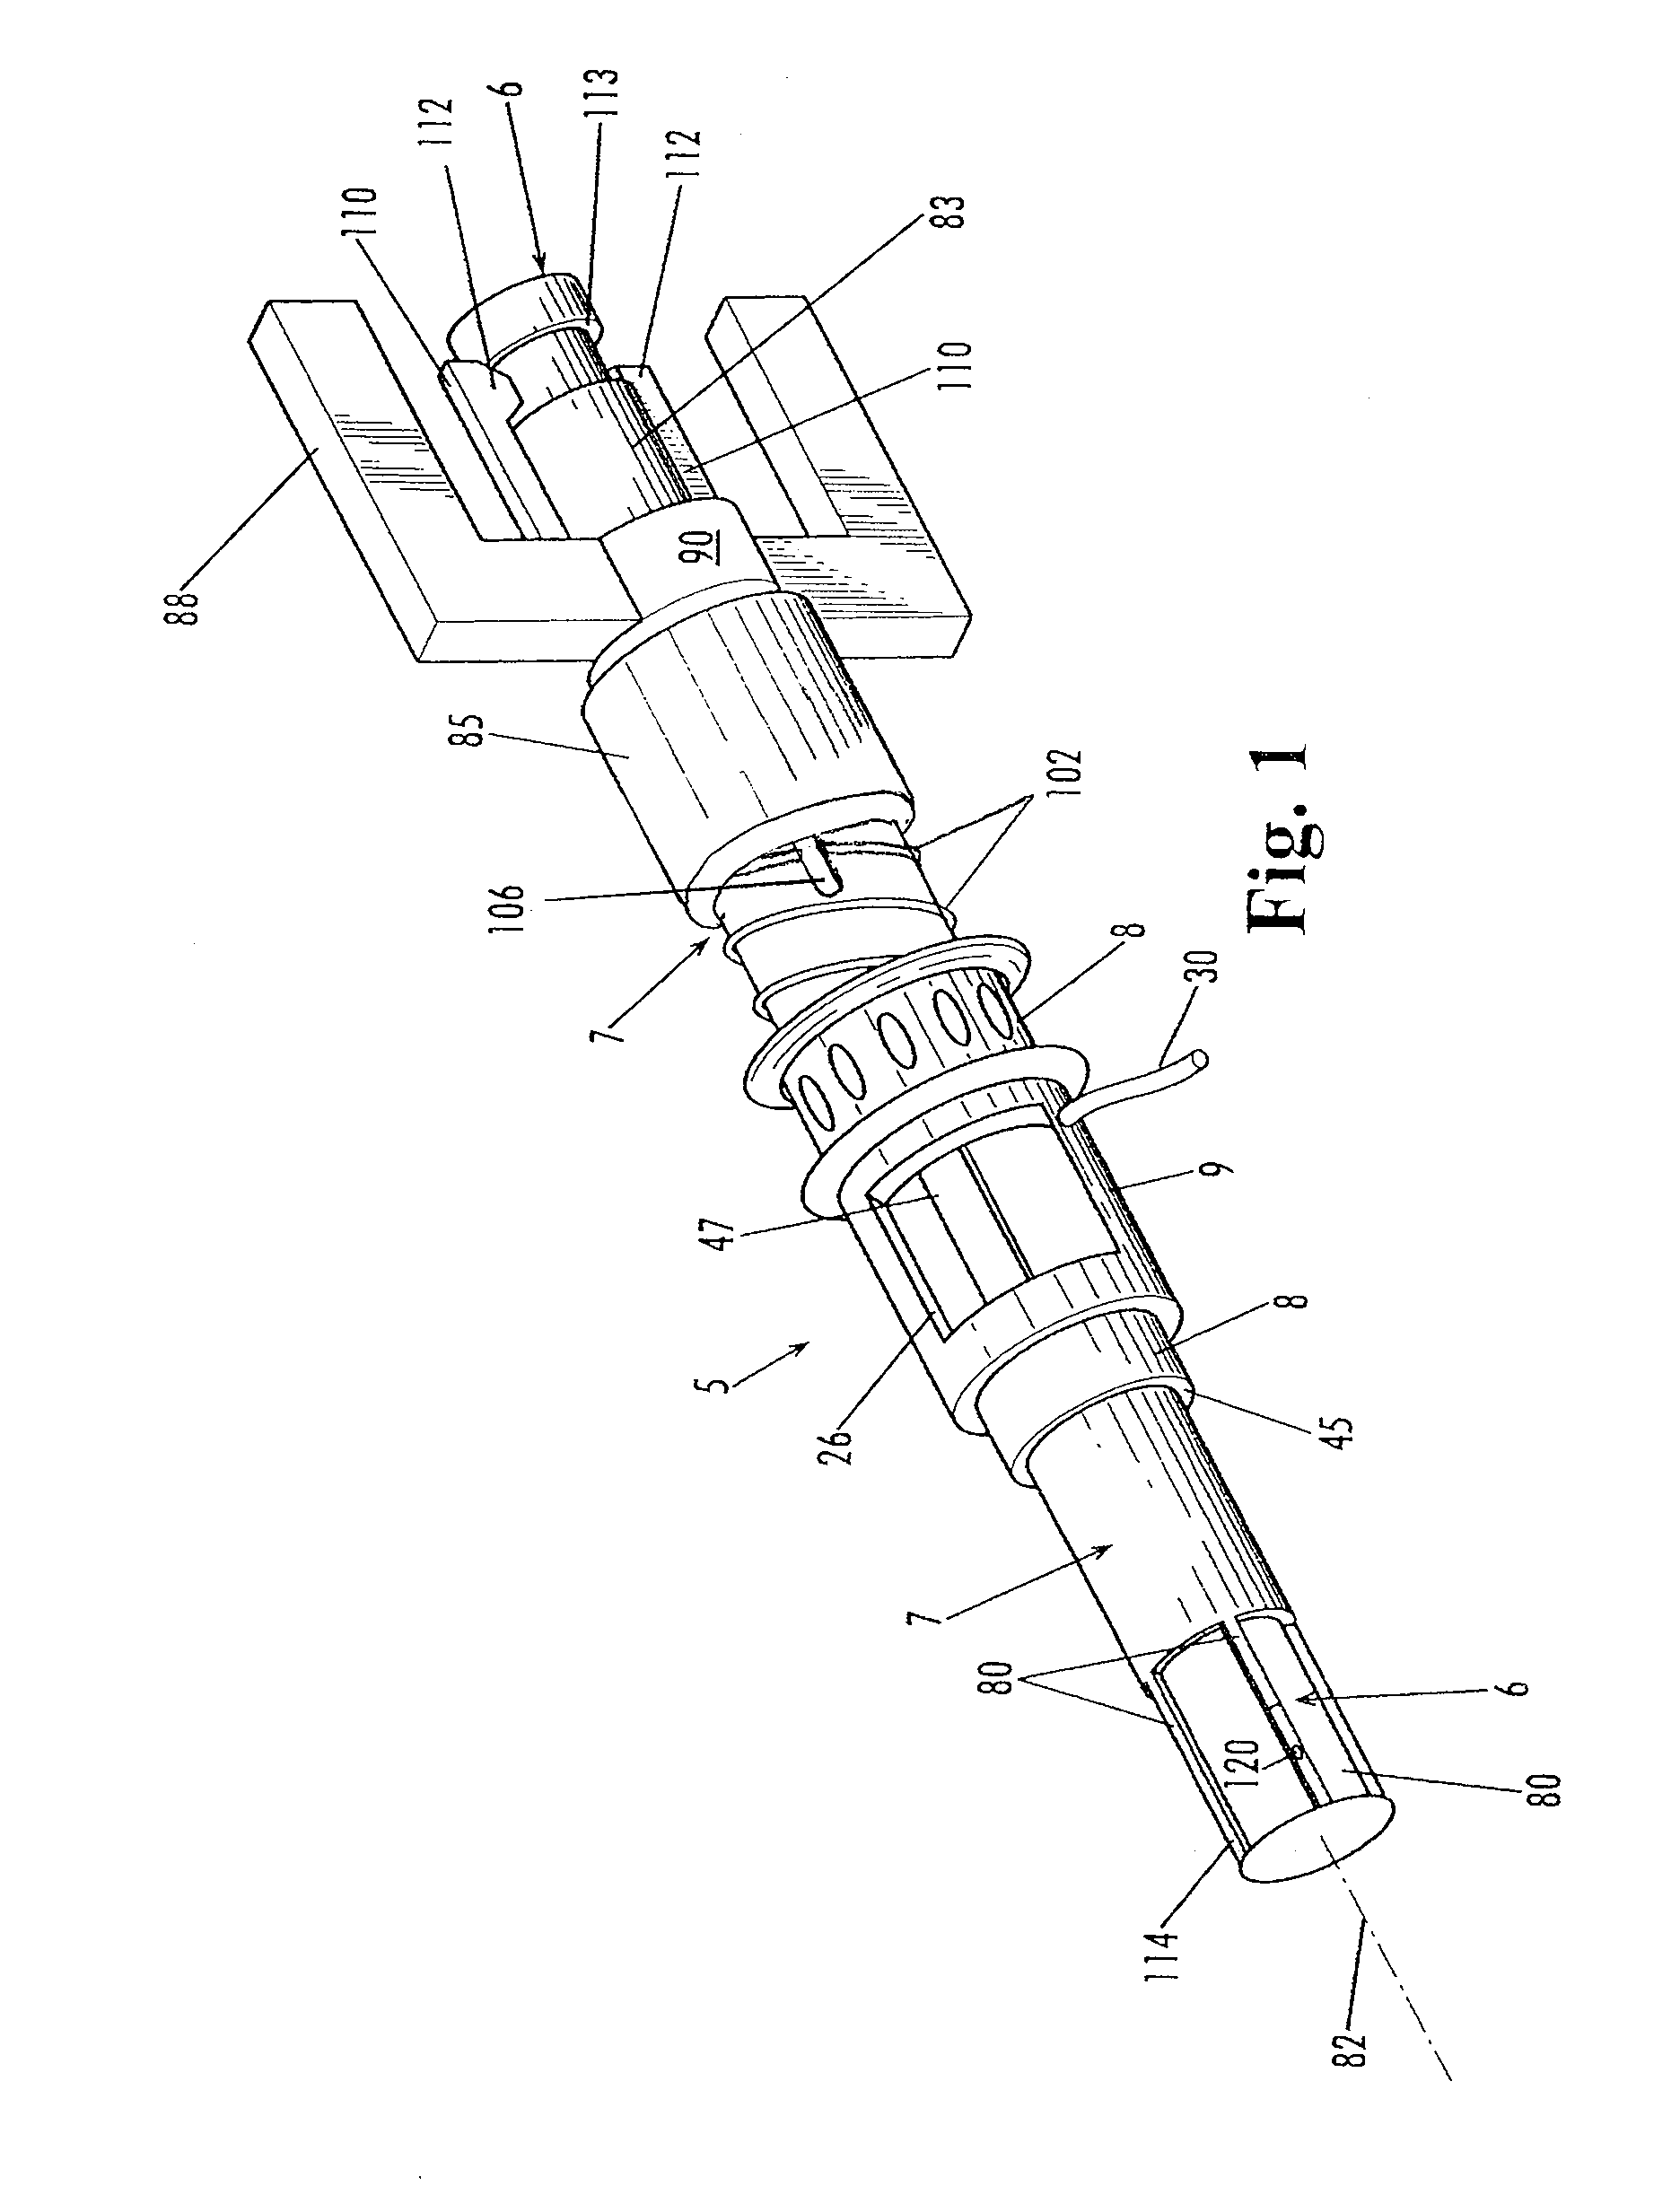 Surgical Instrument for Detecting, Isolating and Excising Tumors